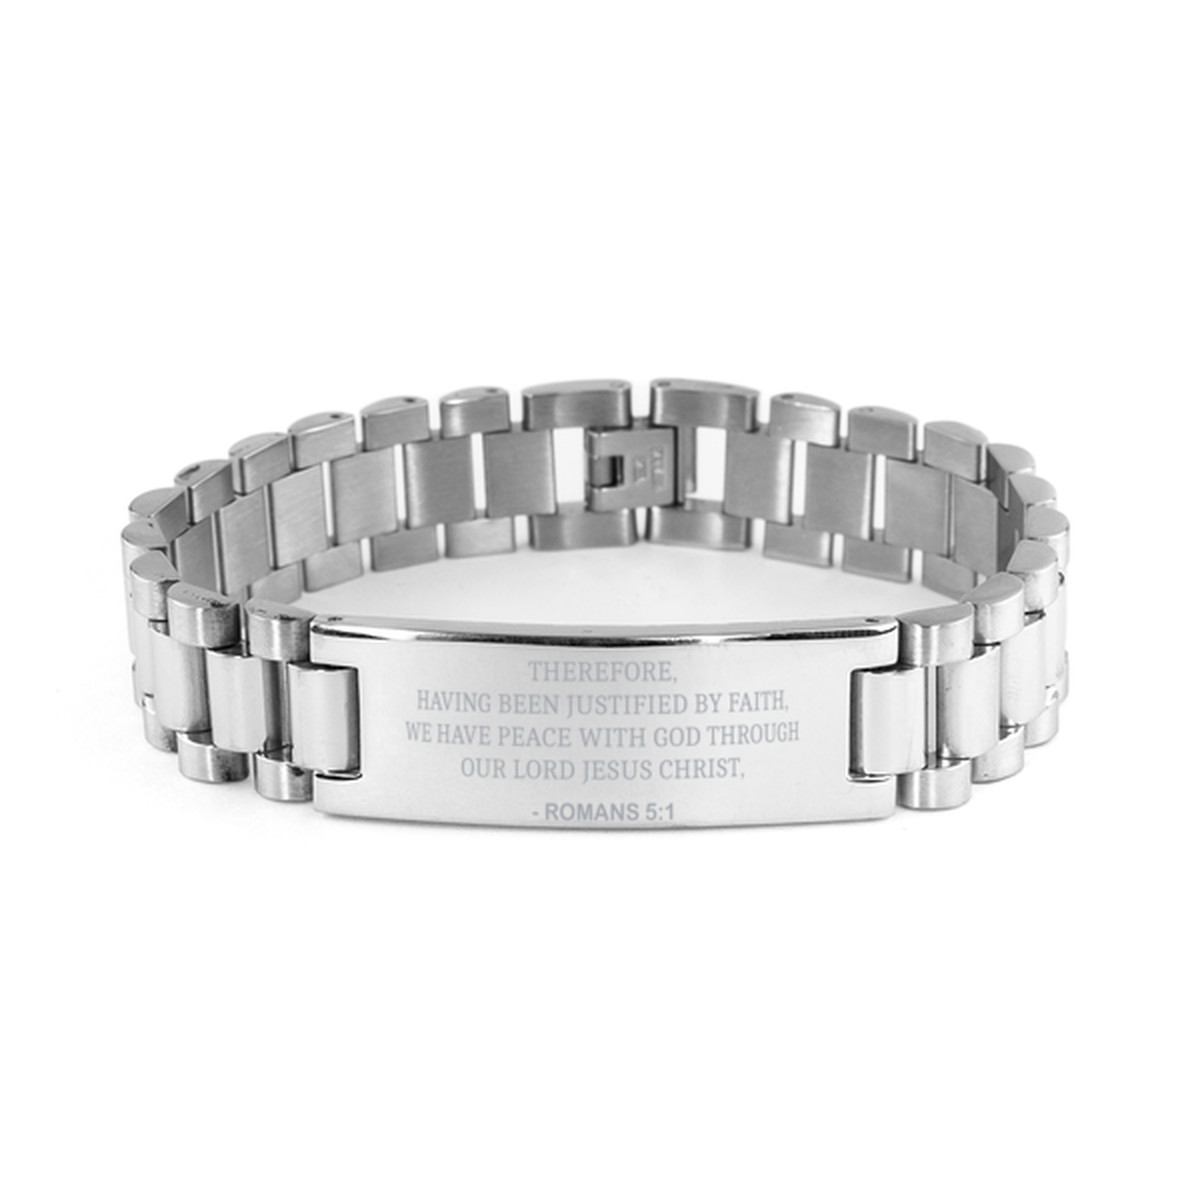 Christian Ladder Stainless Steel Bracelet, Romans 5:1 Therefore, Having Been Justified By Faith, We, Motivational Bible Verse Gifts For Men Women